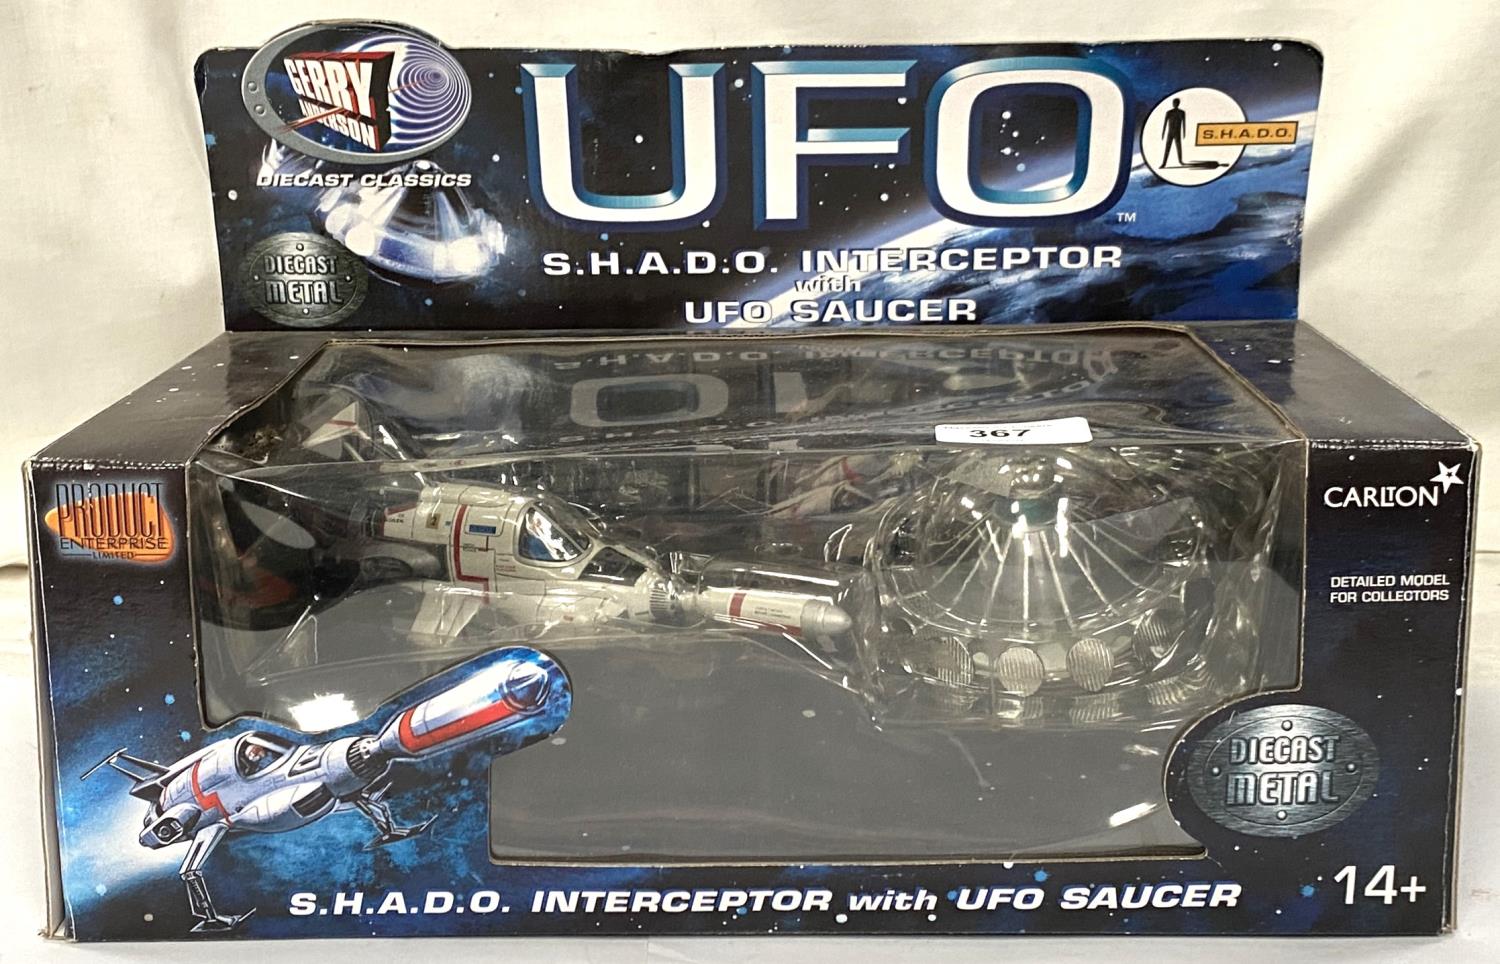 A Gerry Anderson UFO S.W.A.D.O Interceptor with UFO saucers die-cast metal by Carlton in original